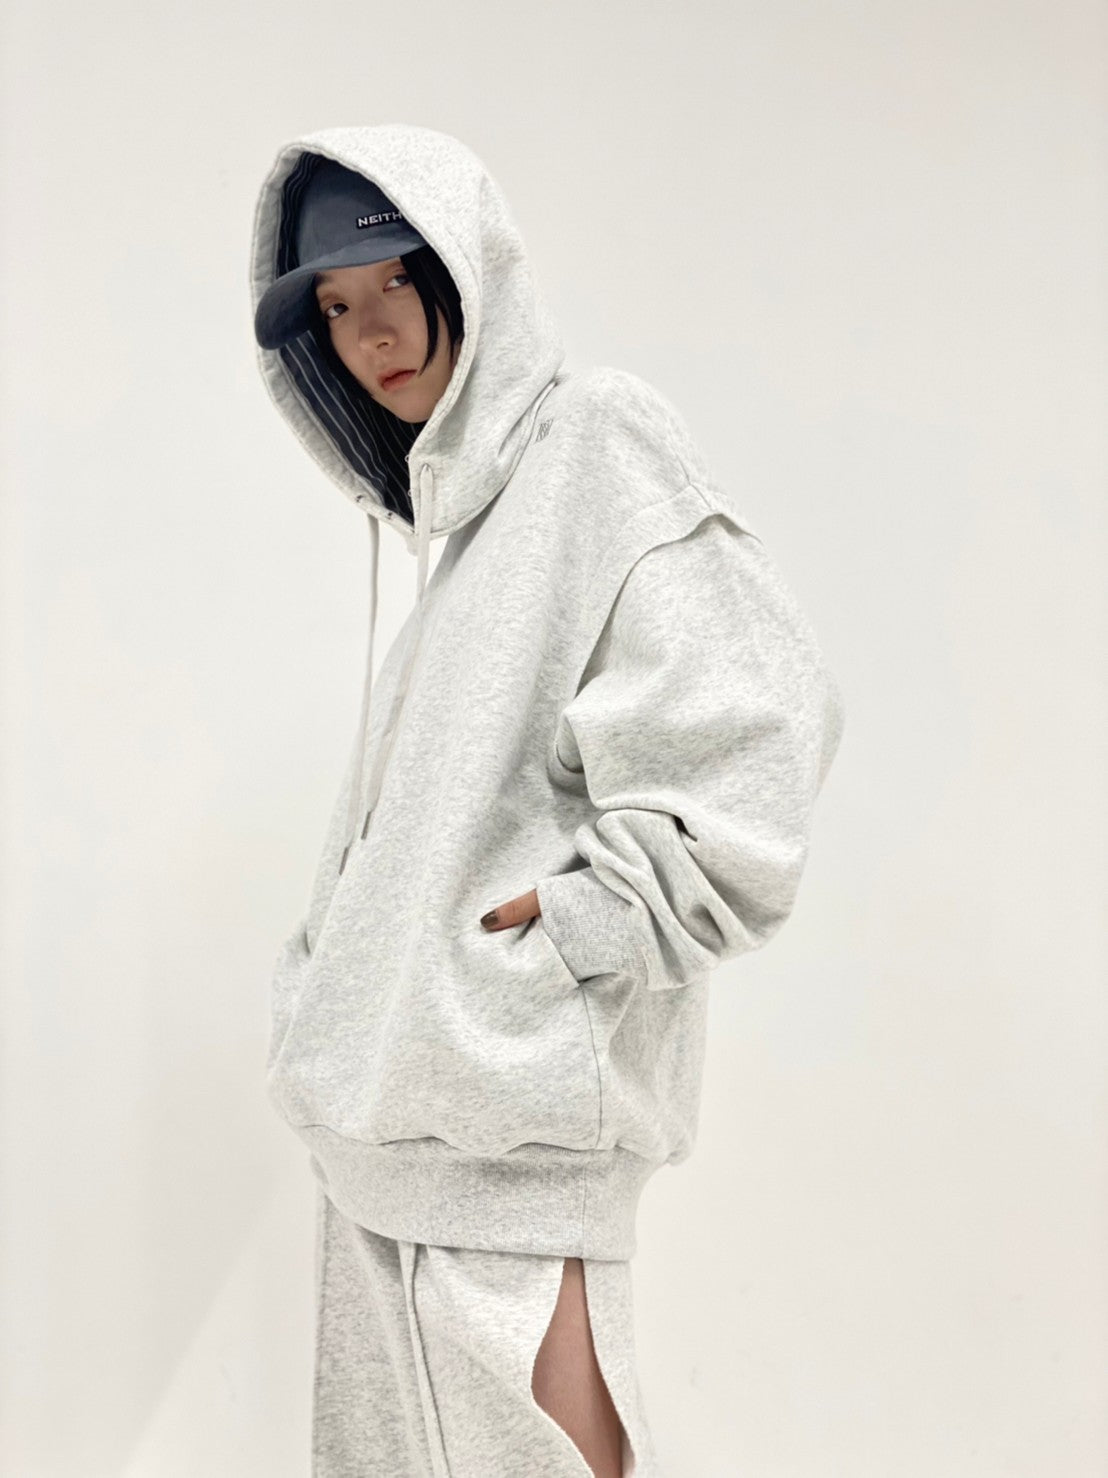 Sweat With Hoodie(Beige)